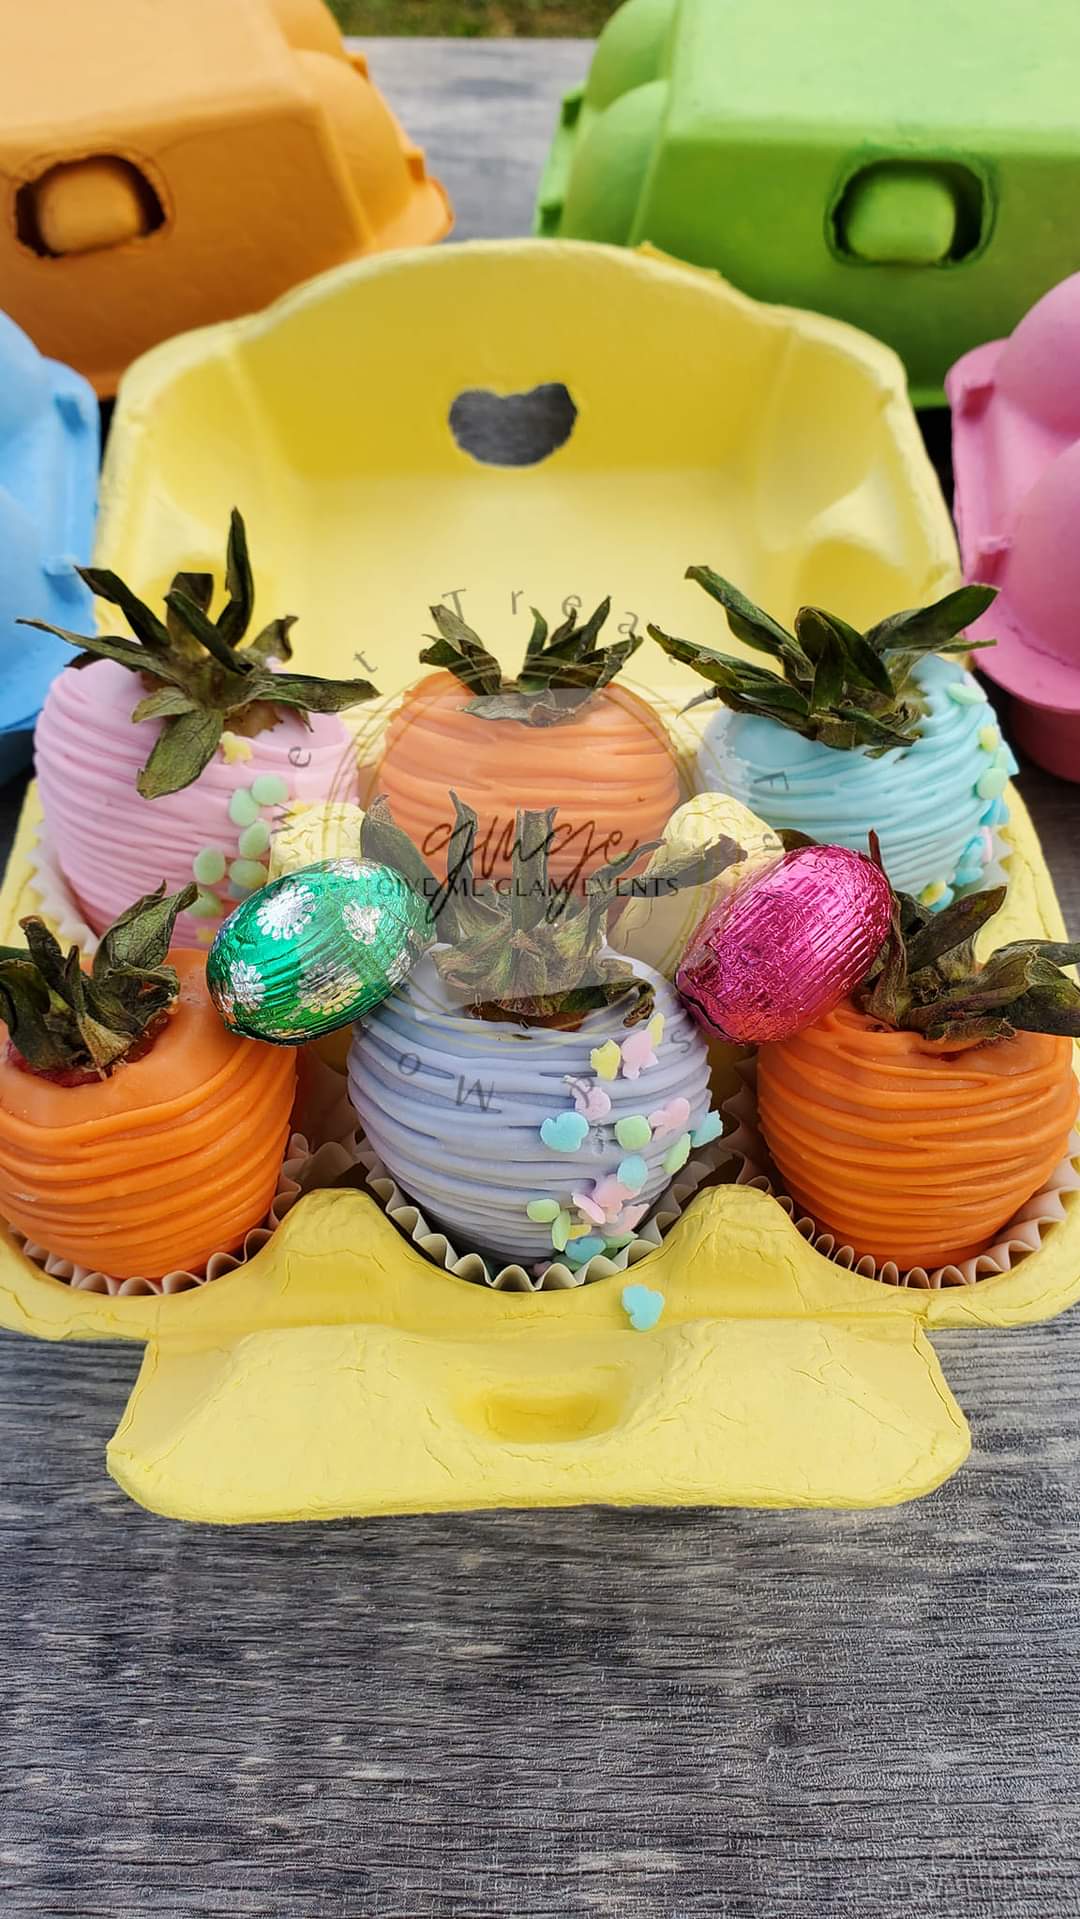 Easter Egg Berry Boxes (LOCAL PICKUP ONLY)